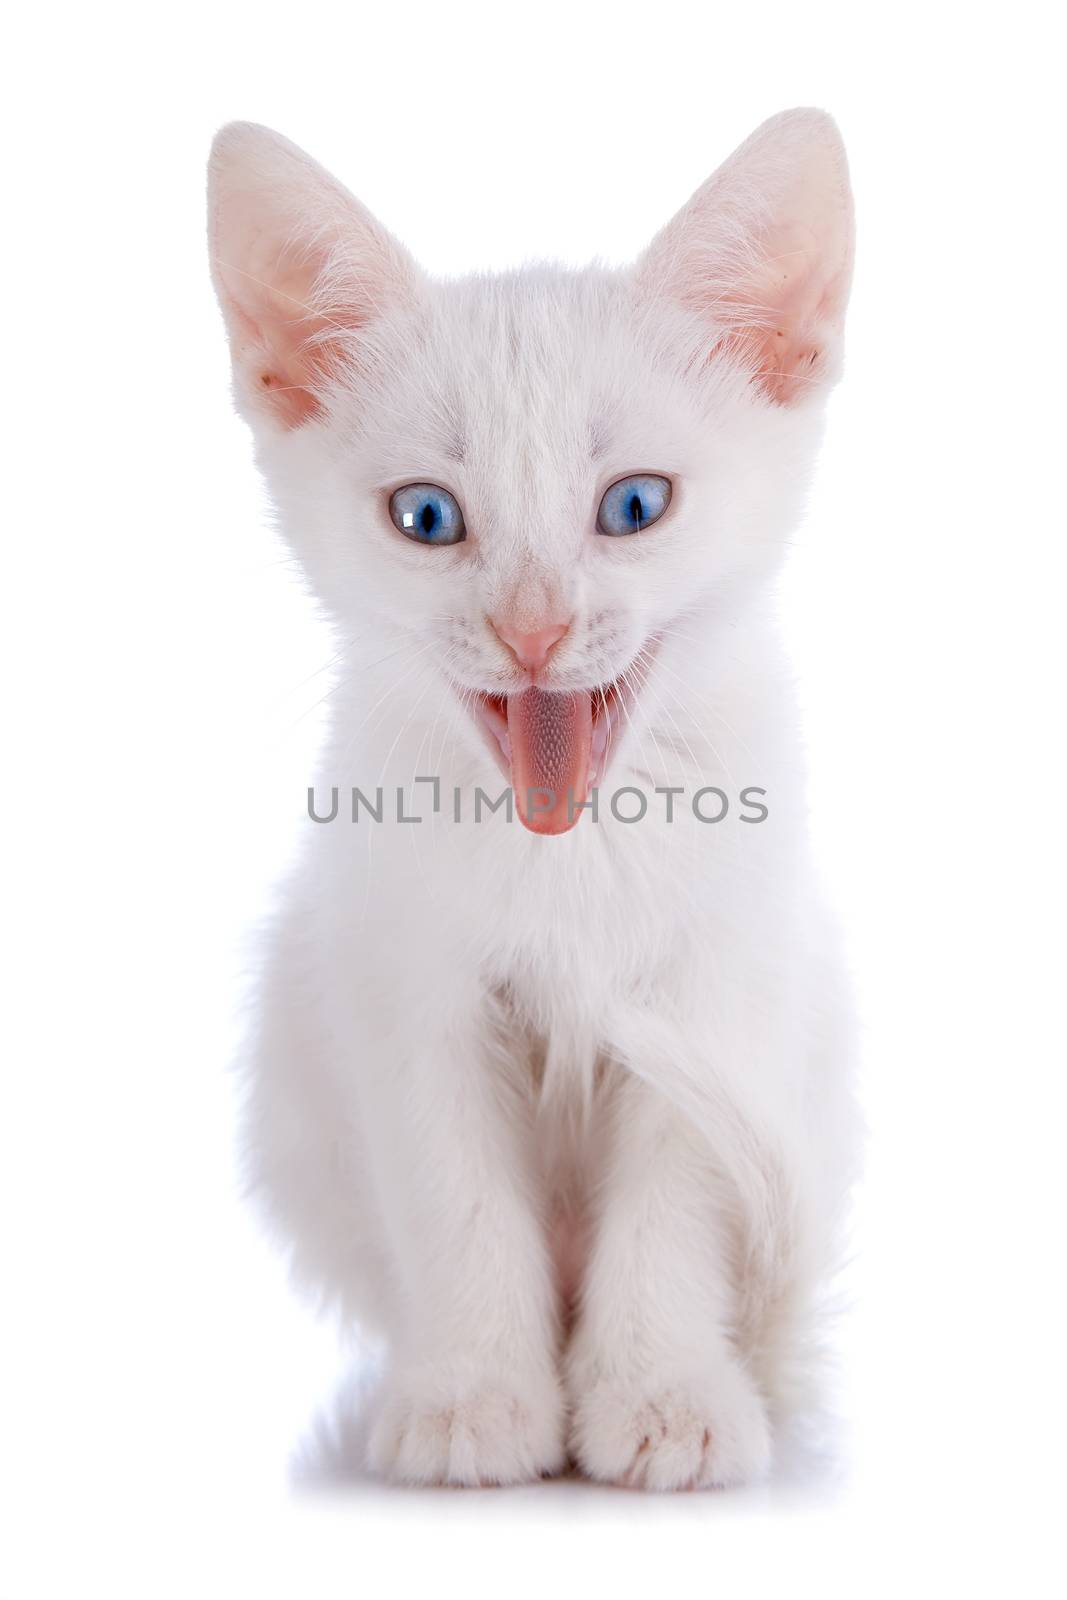 Strongly surprised white kitten with blue eyes. White kitten with blue eyes. Kitten on a white background. Small predator. Small cat.